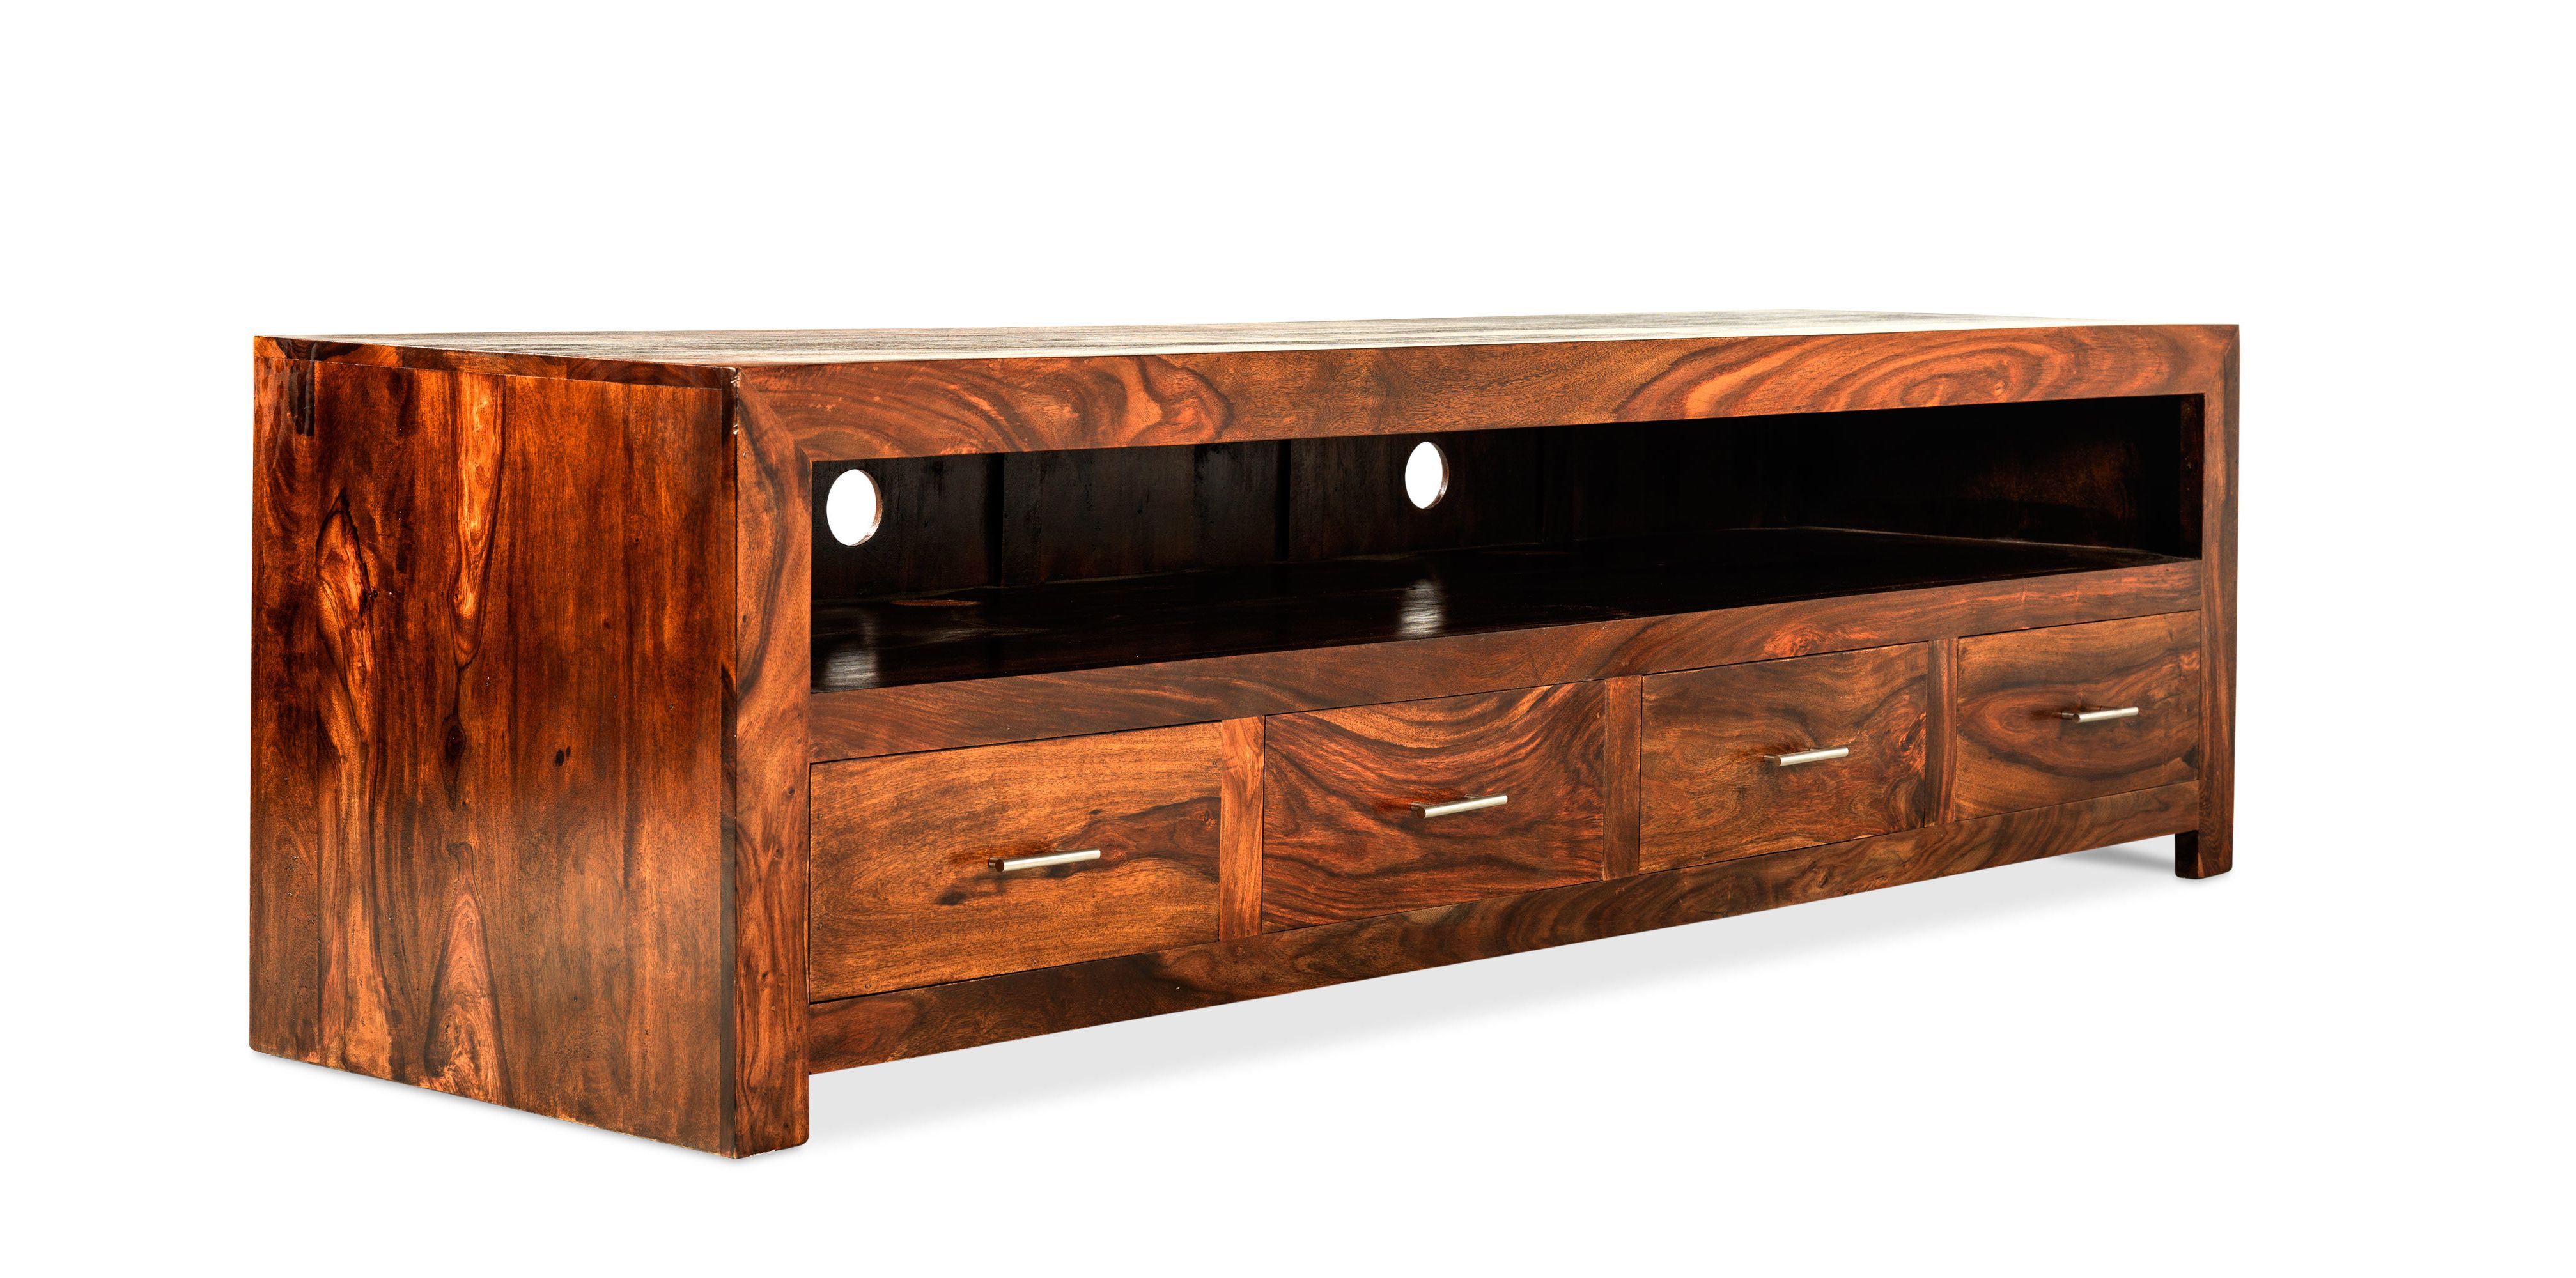 Fashionable Sheesham Tv Stands Throughout Sheesham Tv Stands & Entertainment Units You'll Love (View 17 of 20)